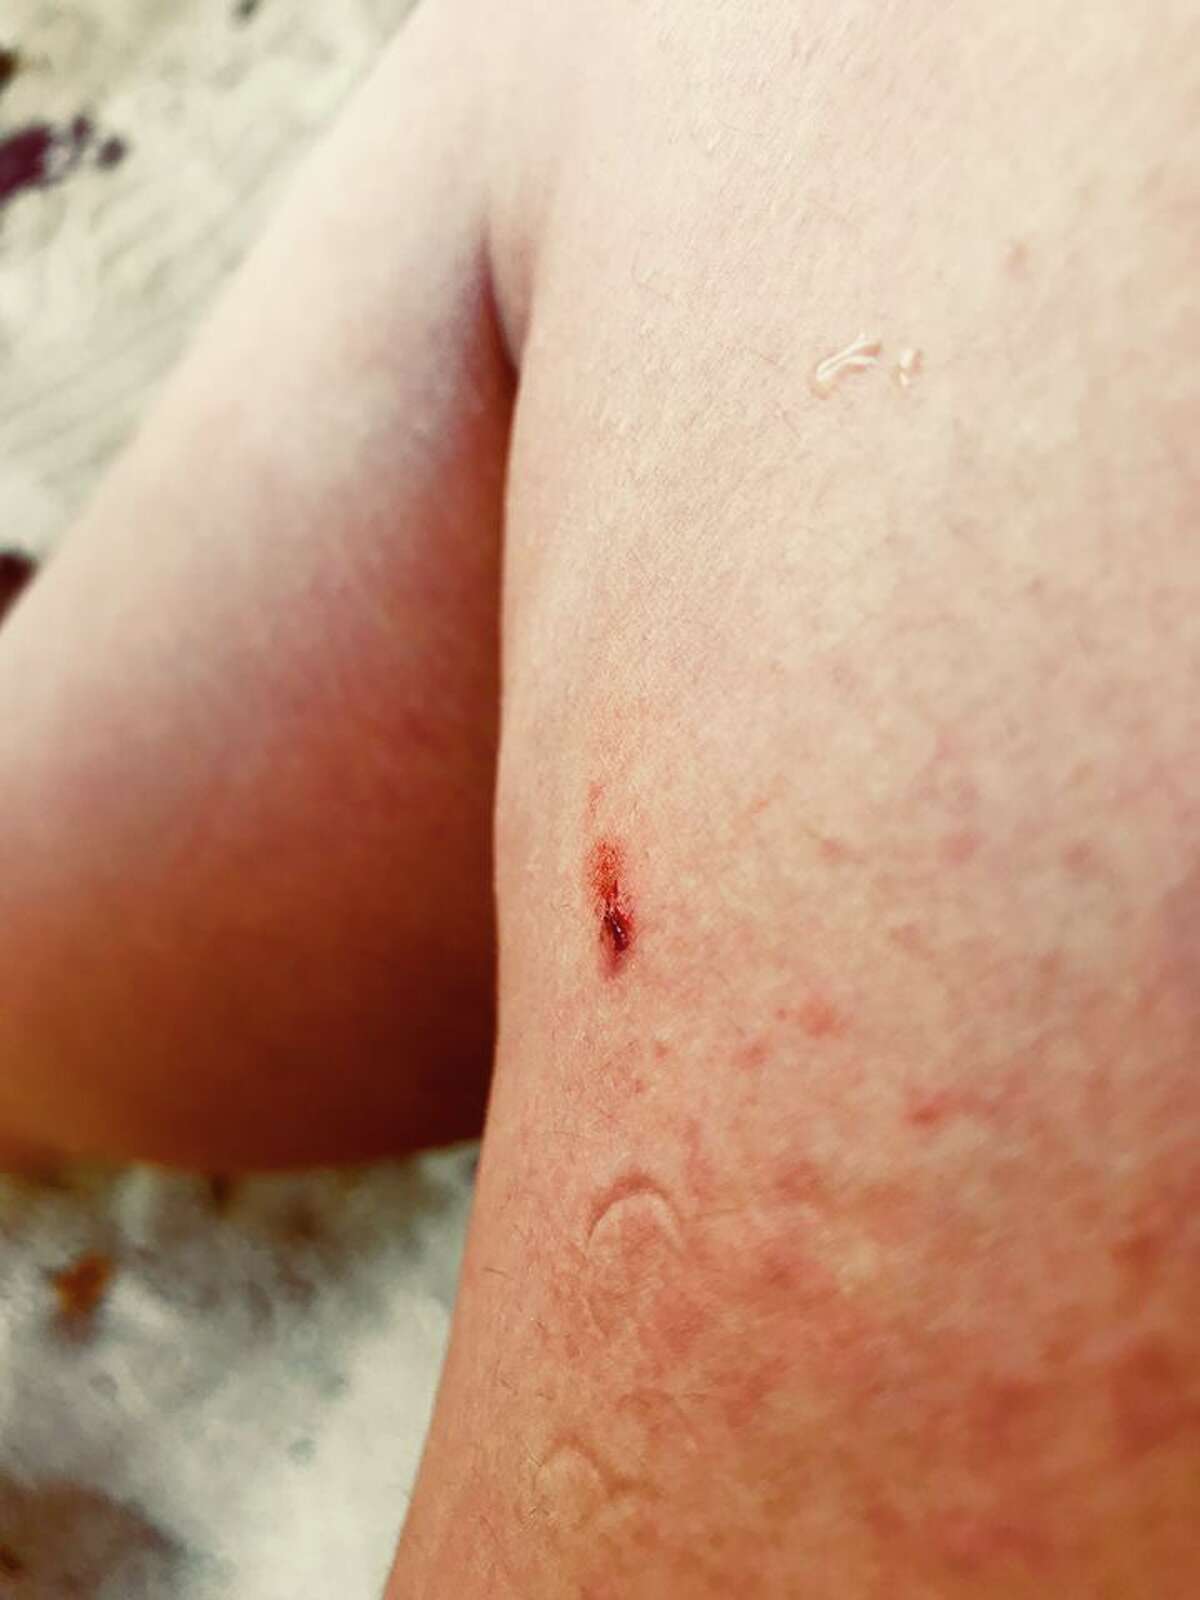 Veronica De La Cruz's leg drips with blood after a small fish bit her while snorkeling in Thailand